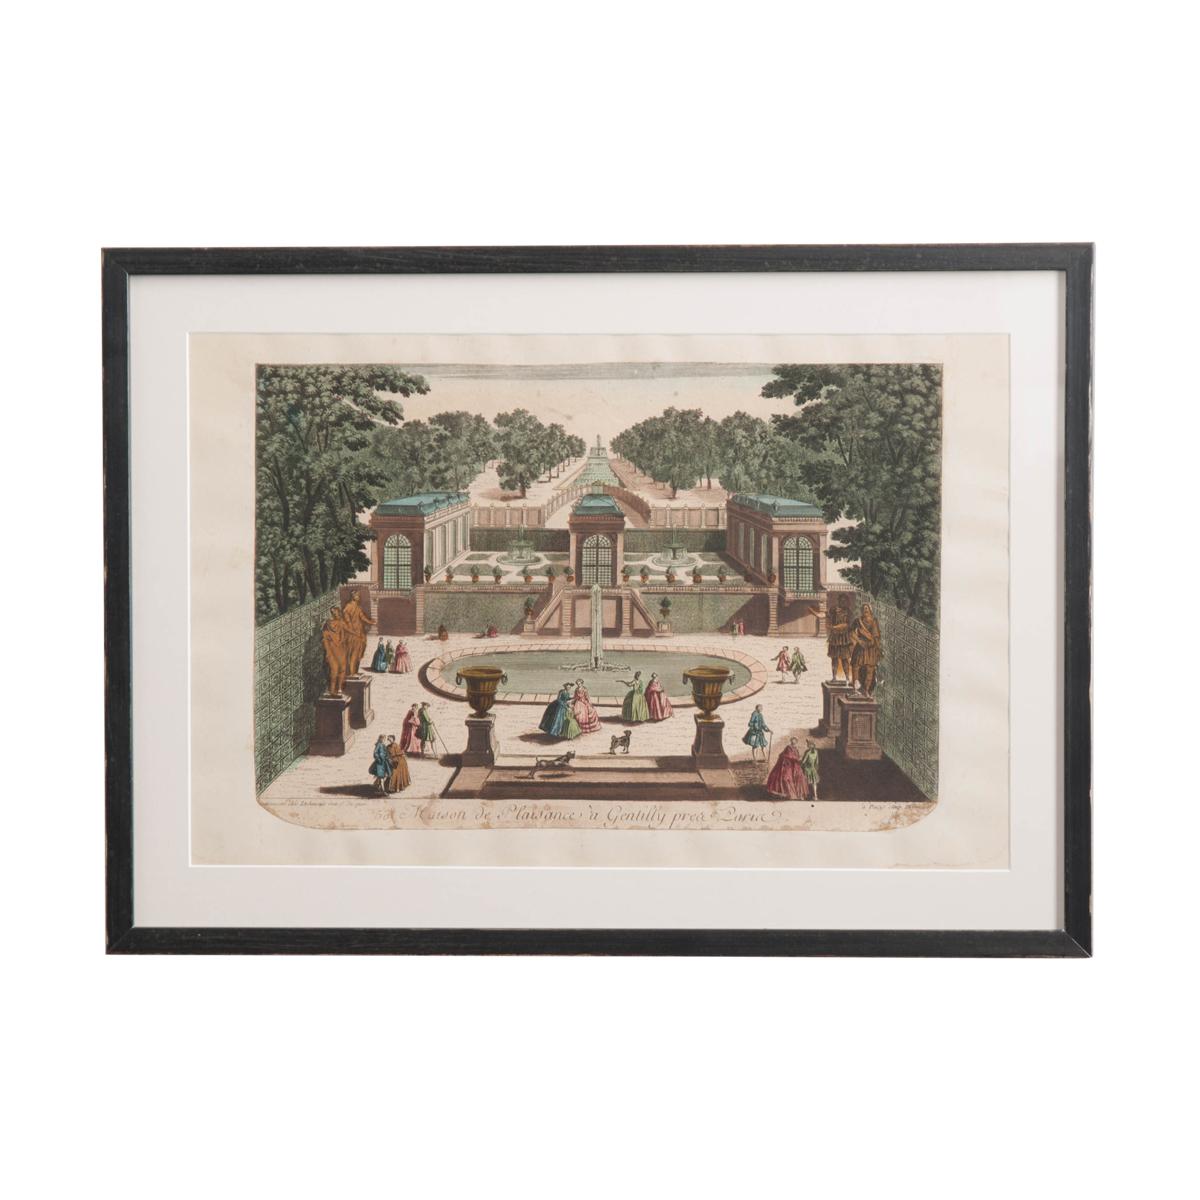 Paper Suite of Twenty French 18th Century Hand Colored Vue d'Optique Etchings